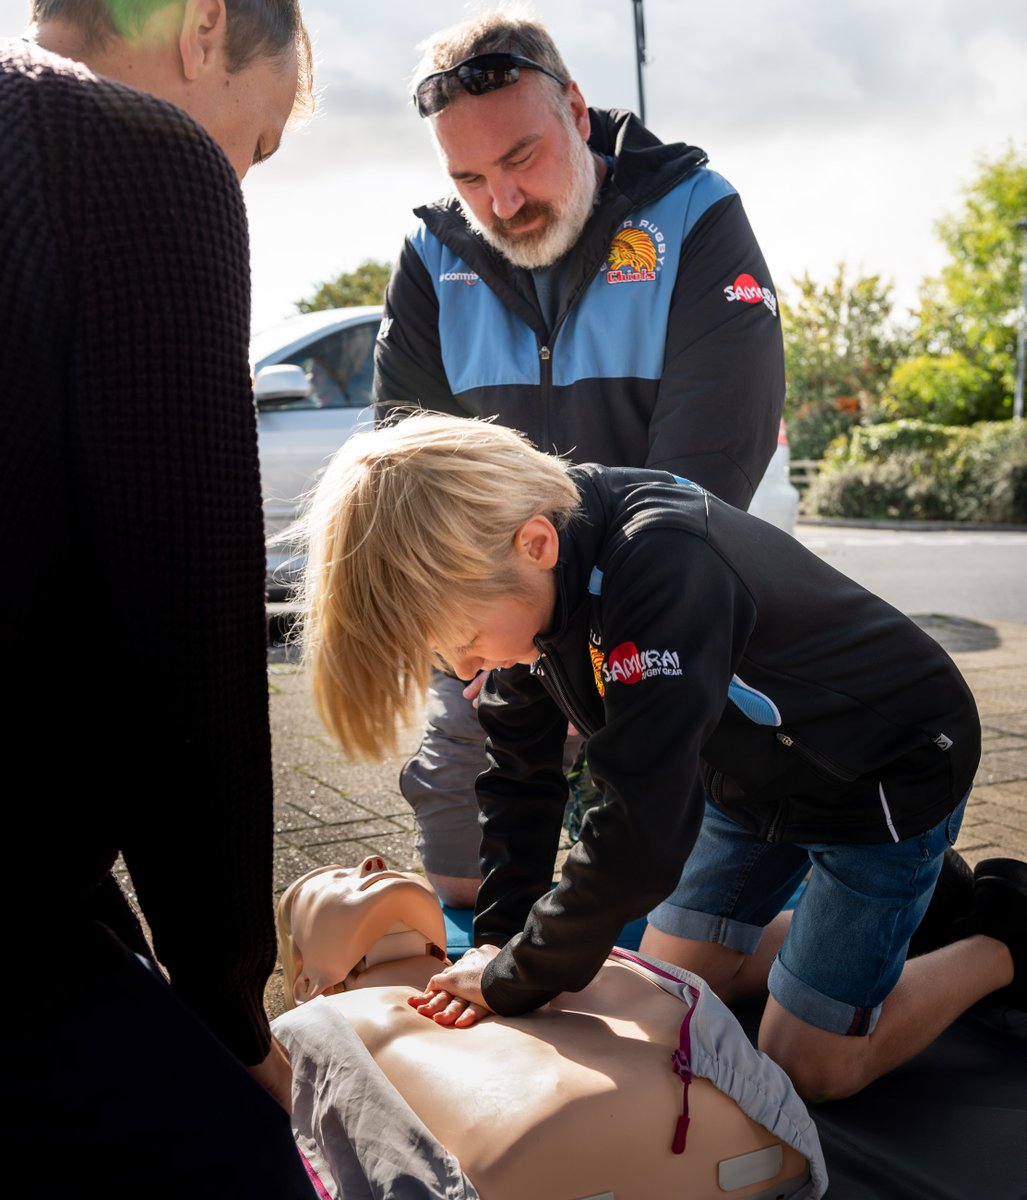 #RestartaHeart 

Attended the site of my own #SCA (@DavidLloydUK #Exeter) yesterday with the fantastic local resuscitation team members.

Great to see the young people getting hands-on too and learning at @ExeterChiefs.  

resus.org.uk/get-involved/r…